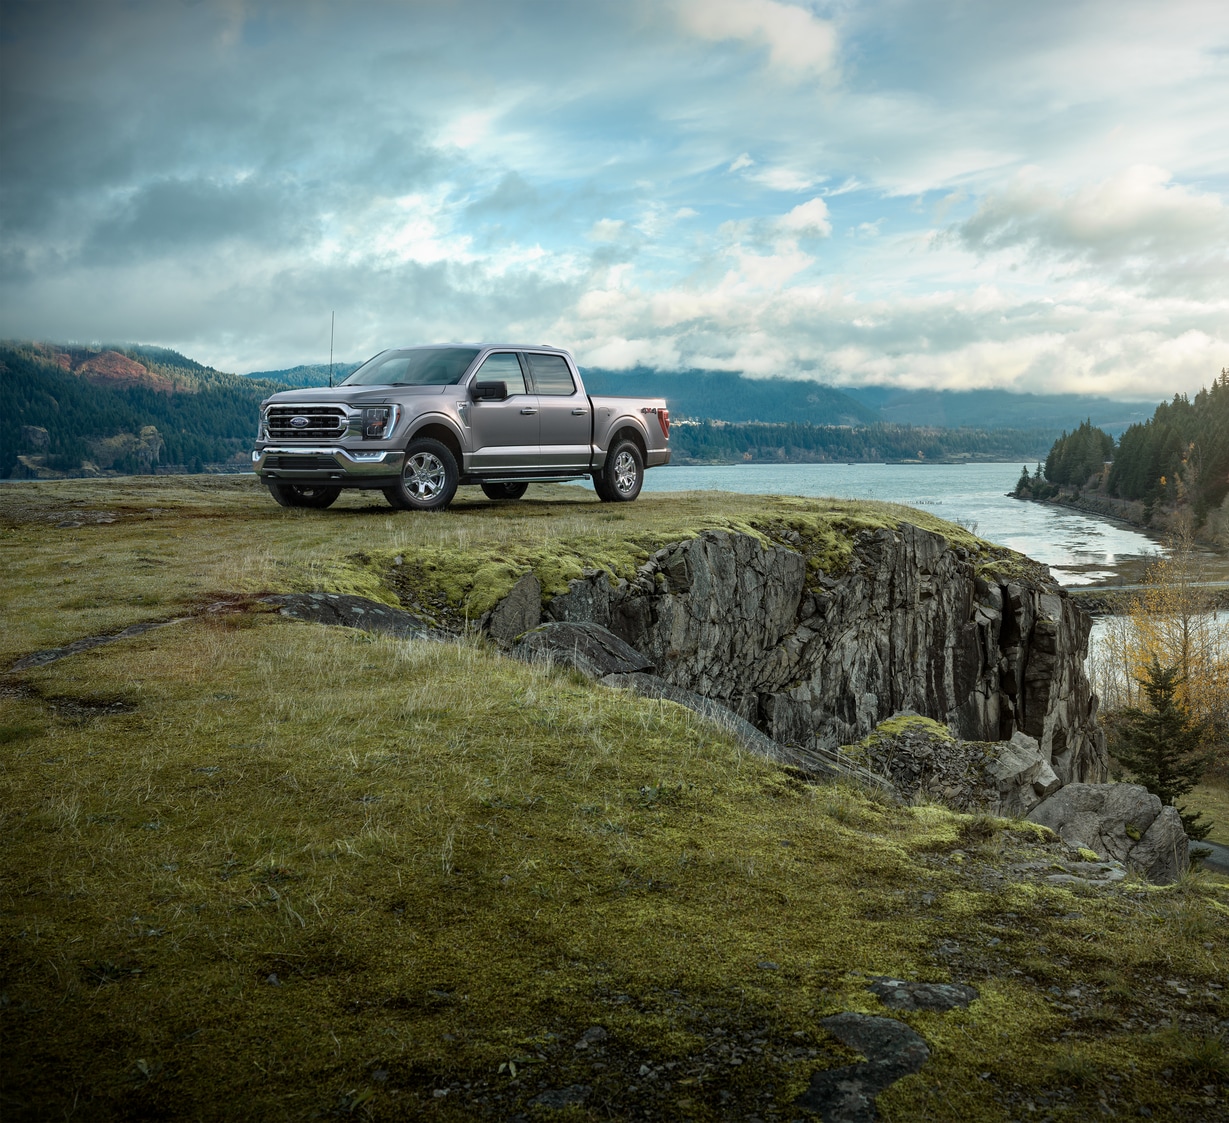 silver Ford F-150 truck parked on a rocky outcropping, overlooking a mountain river